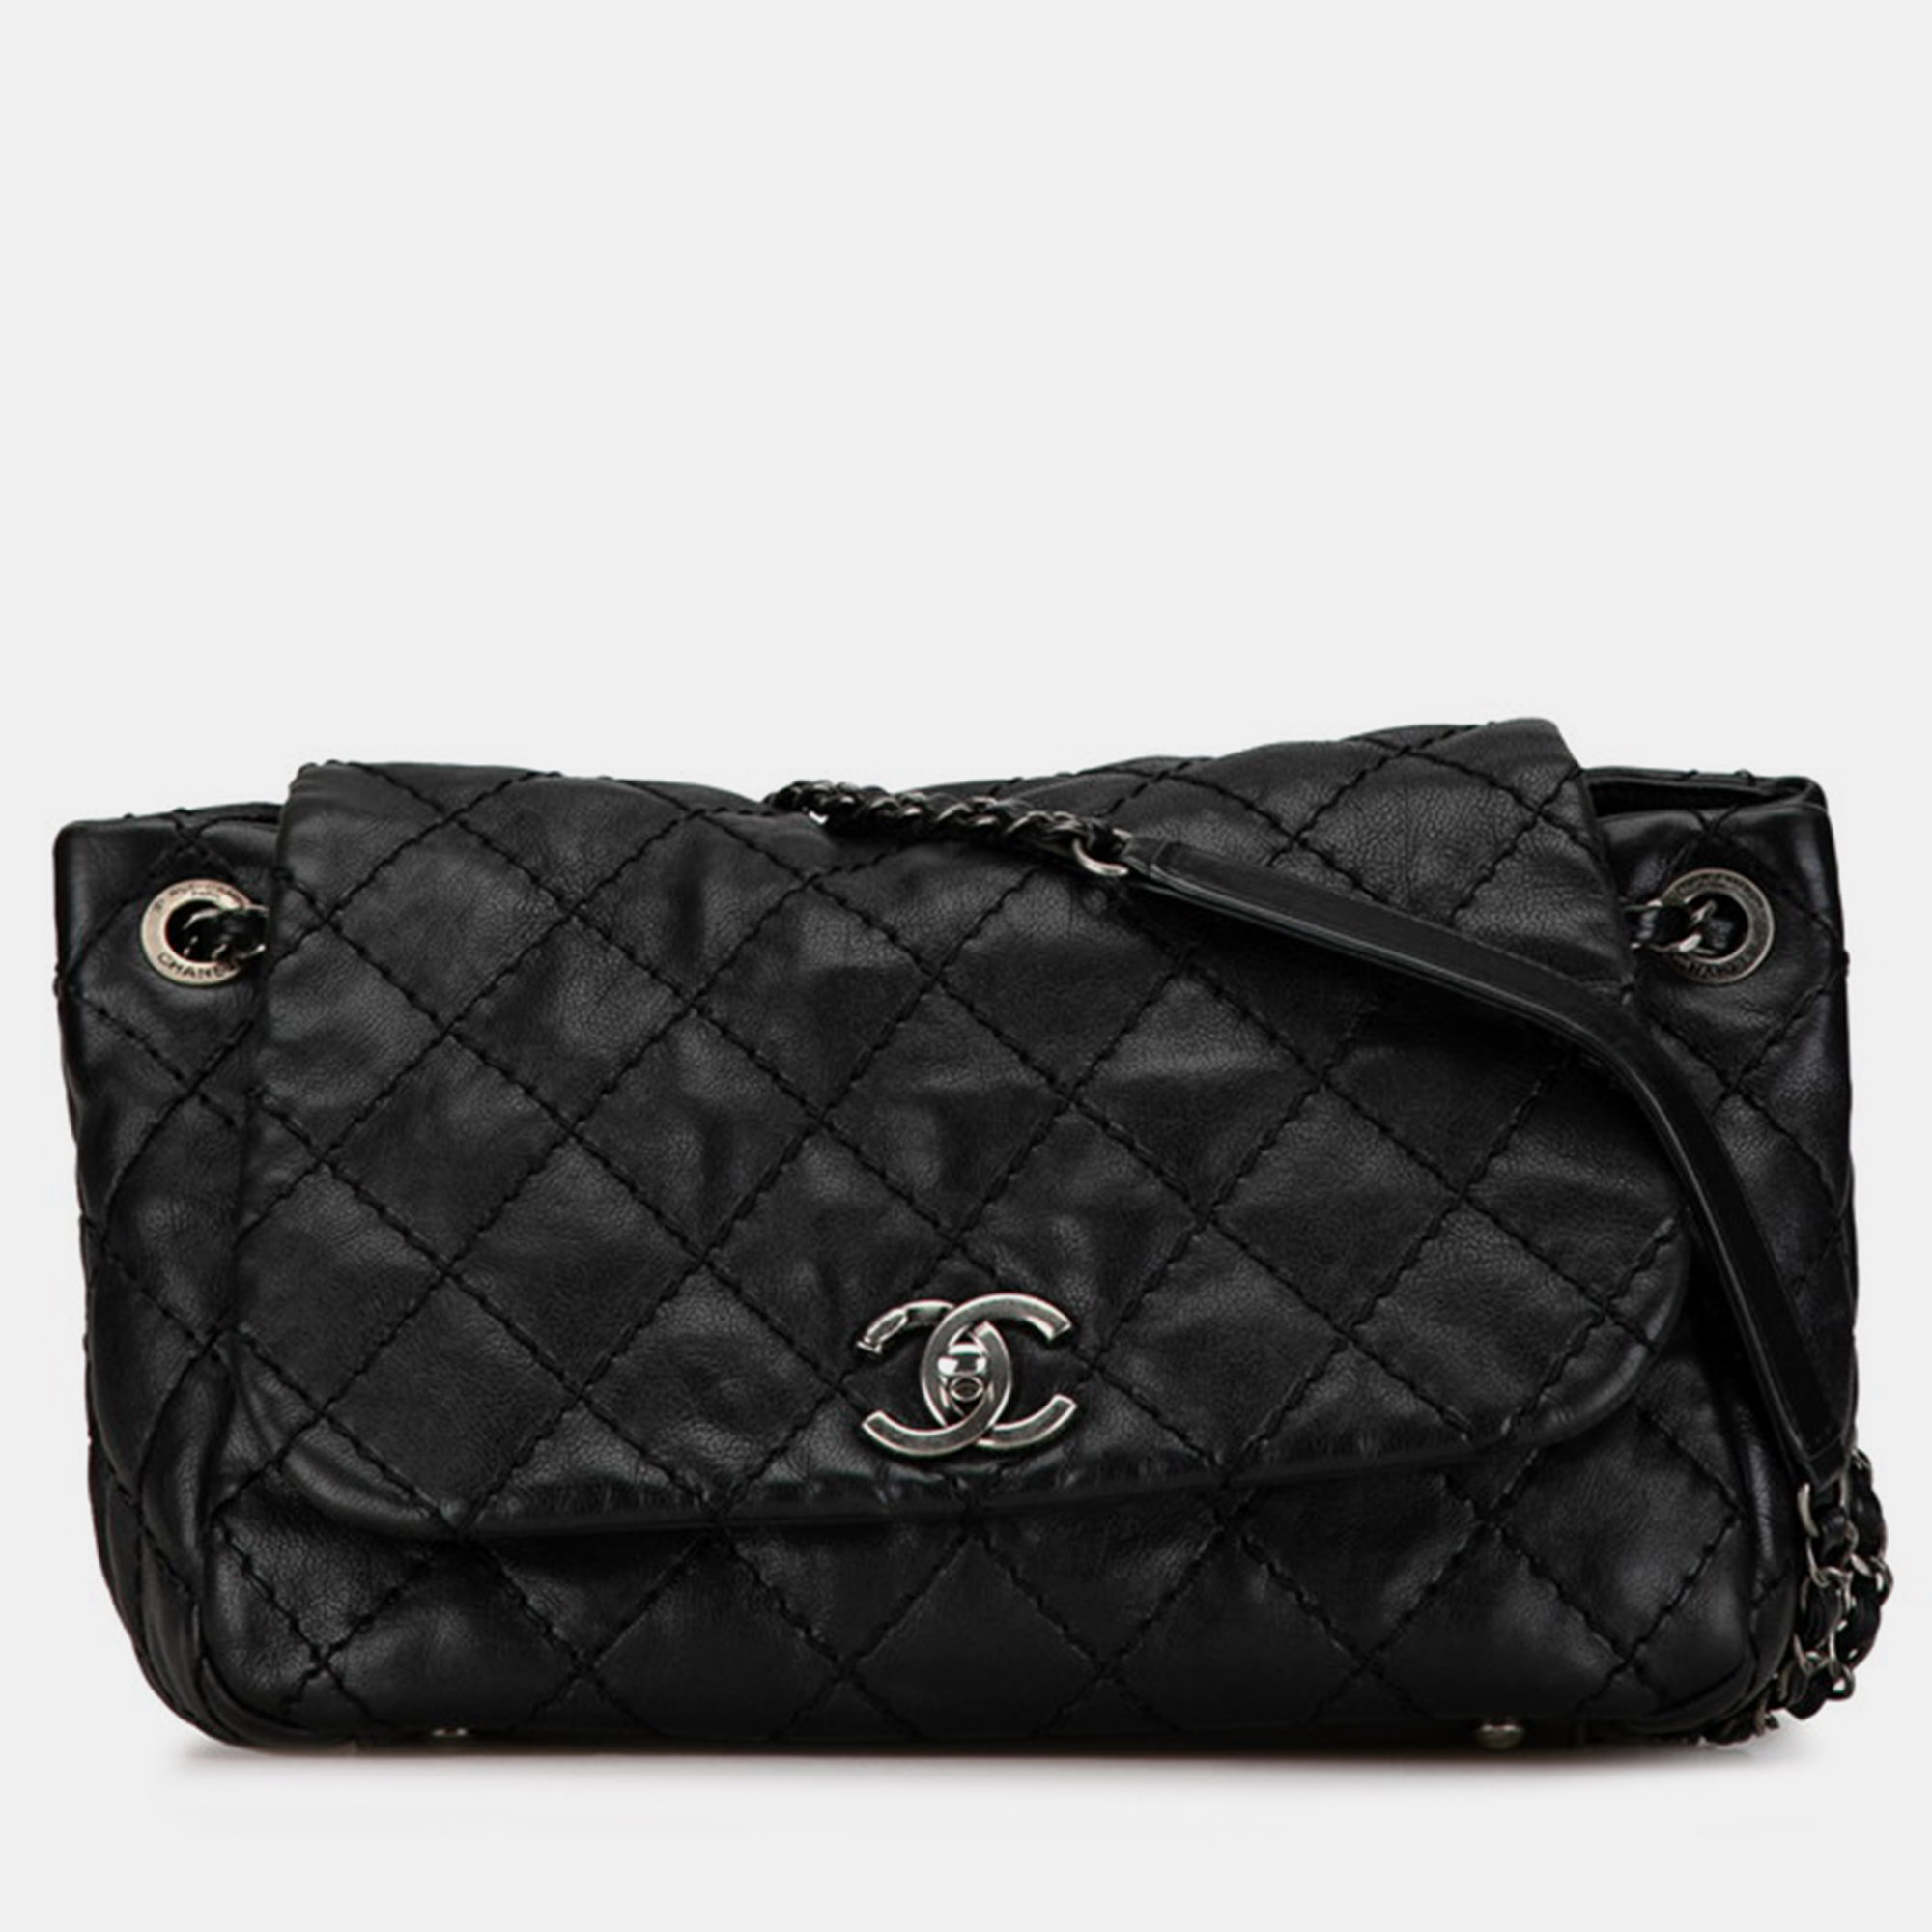 

Chanel Black Quilted Leather CC Crossbody Bag